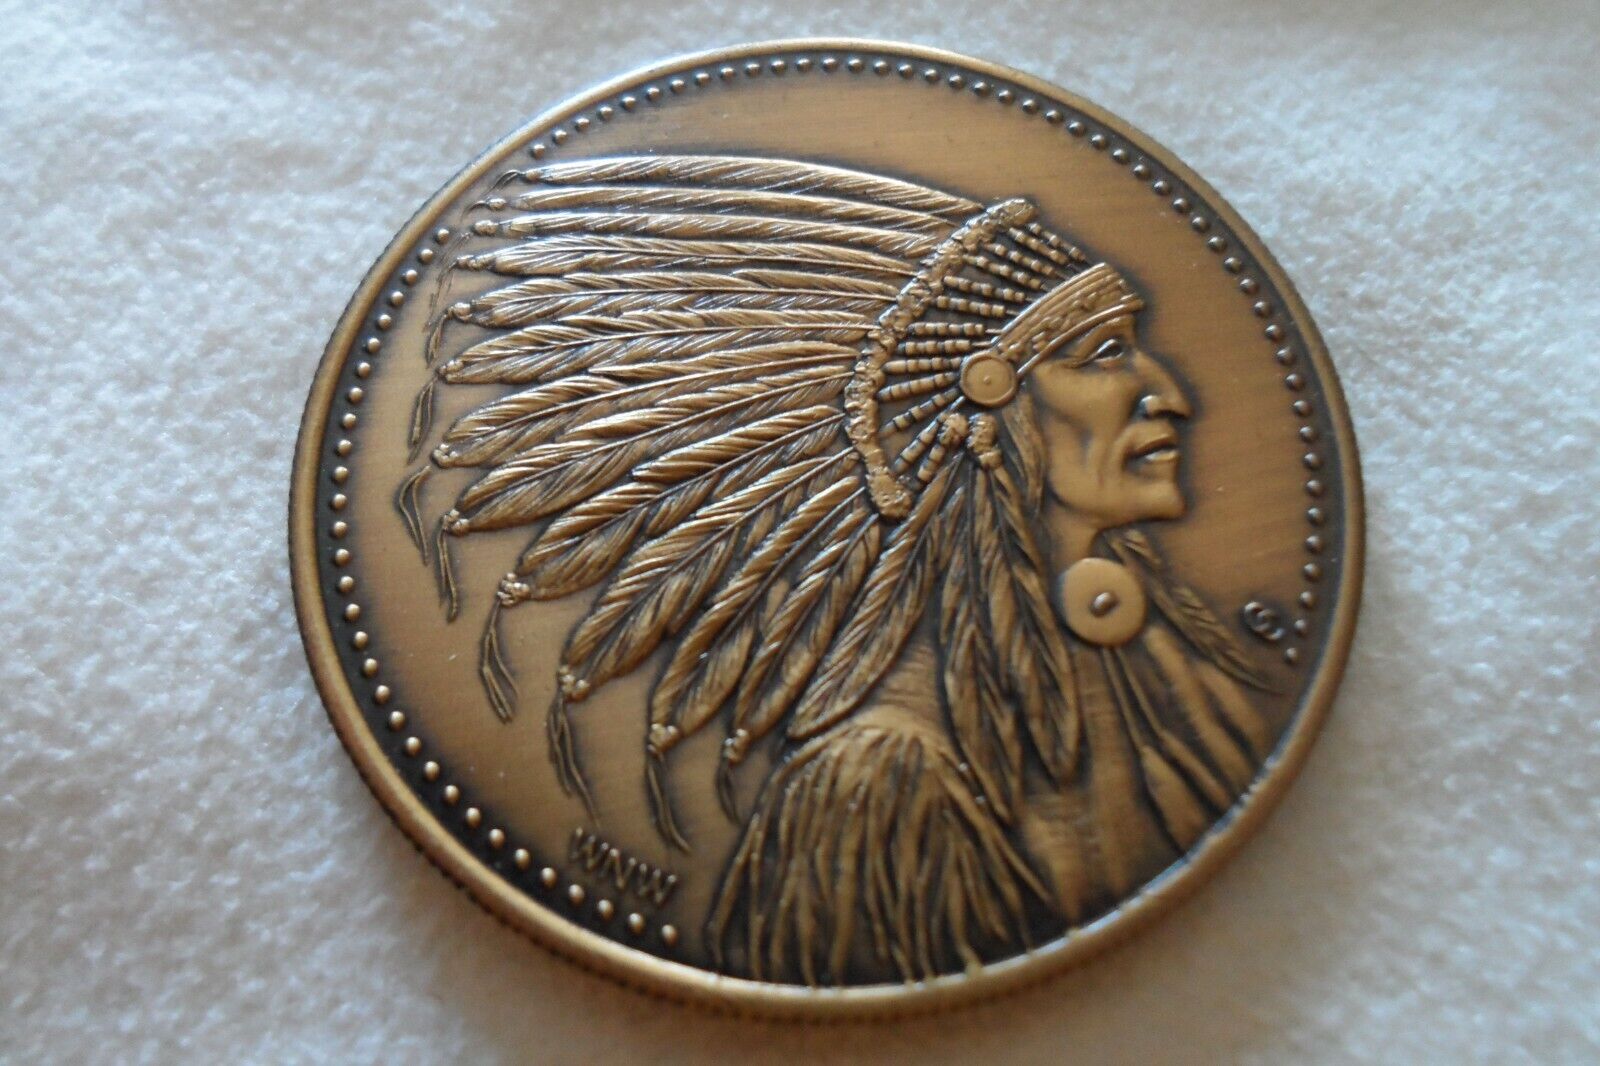 VERY UNIQUE AND GORGEOUS 3 COIN NATIVE AMERICAN SET OSAGE AND SIOUX Без бренда - фотография #6